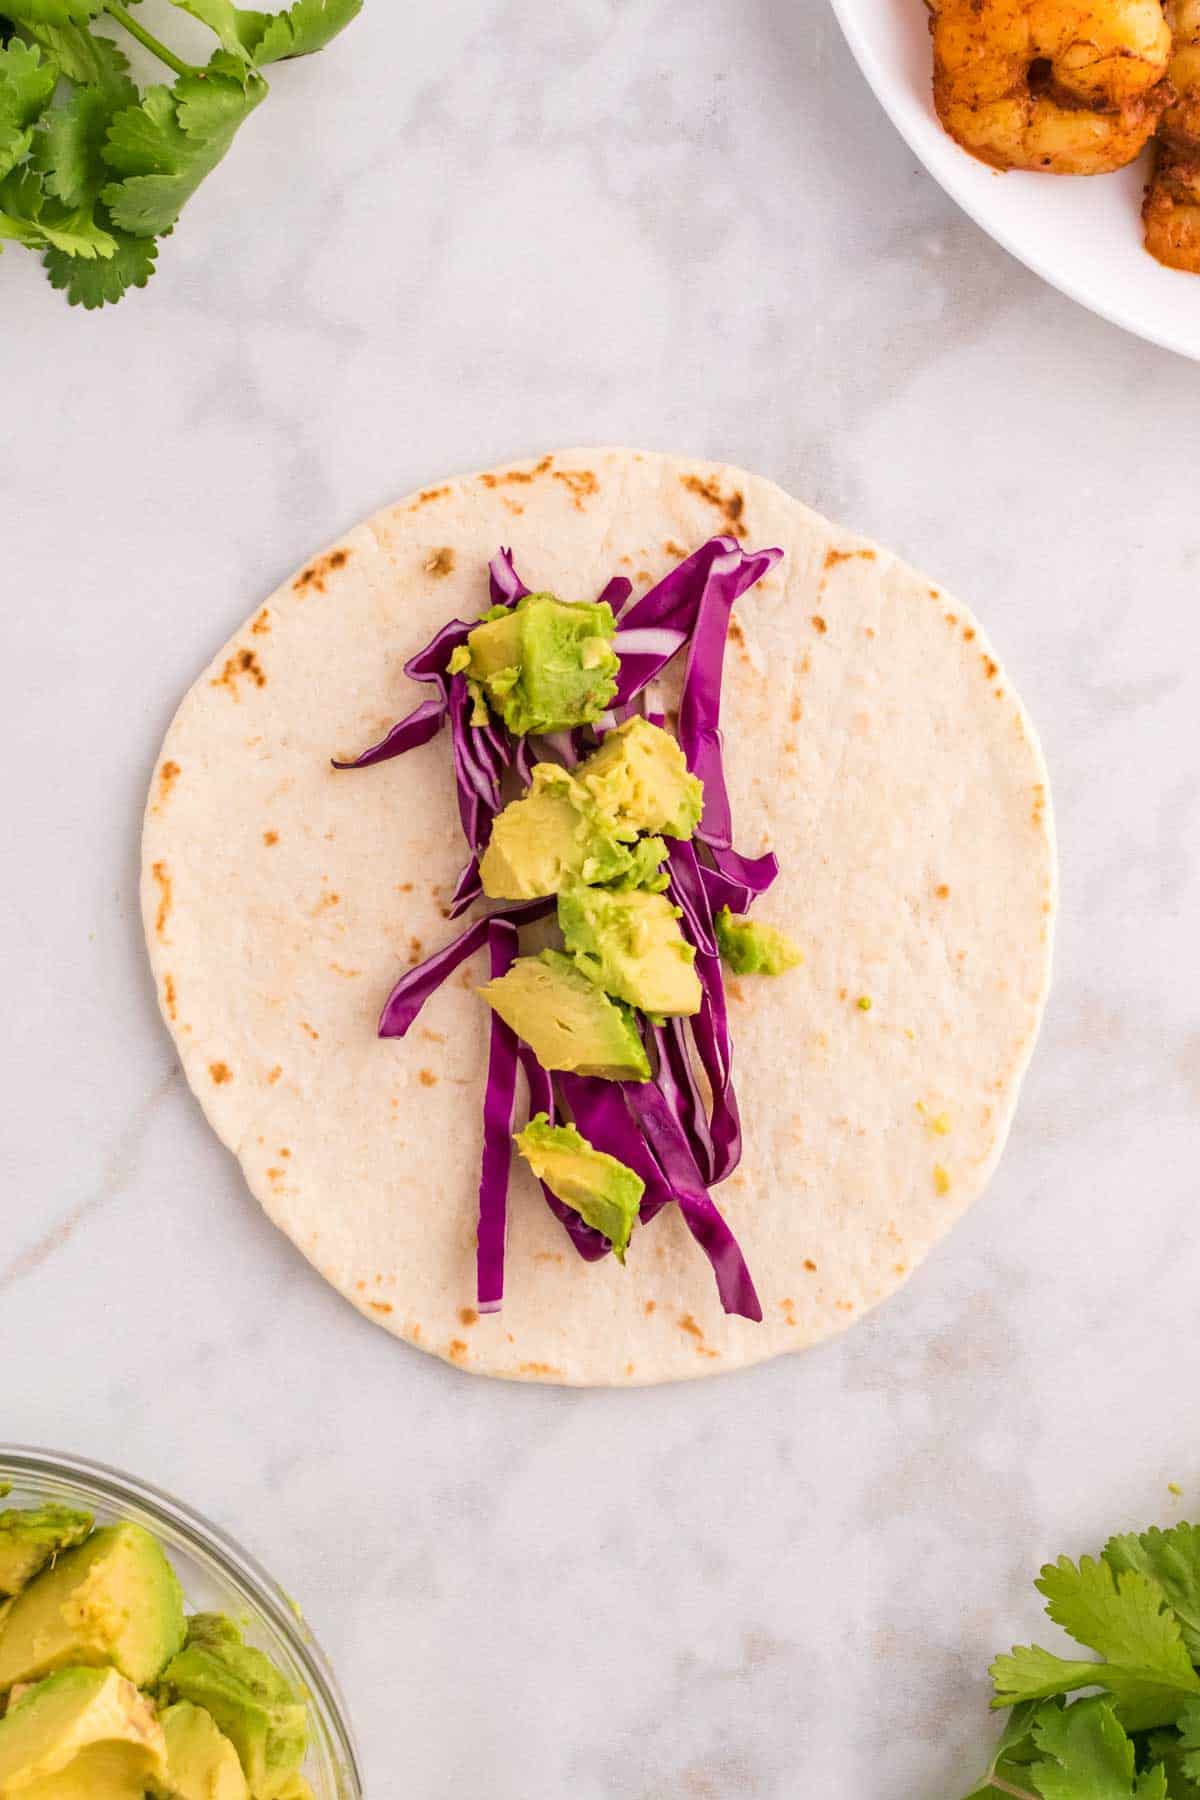 diced avocado and sliced red cabbage on a flour tortilla